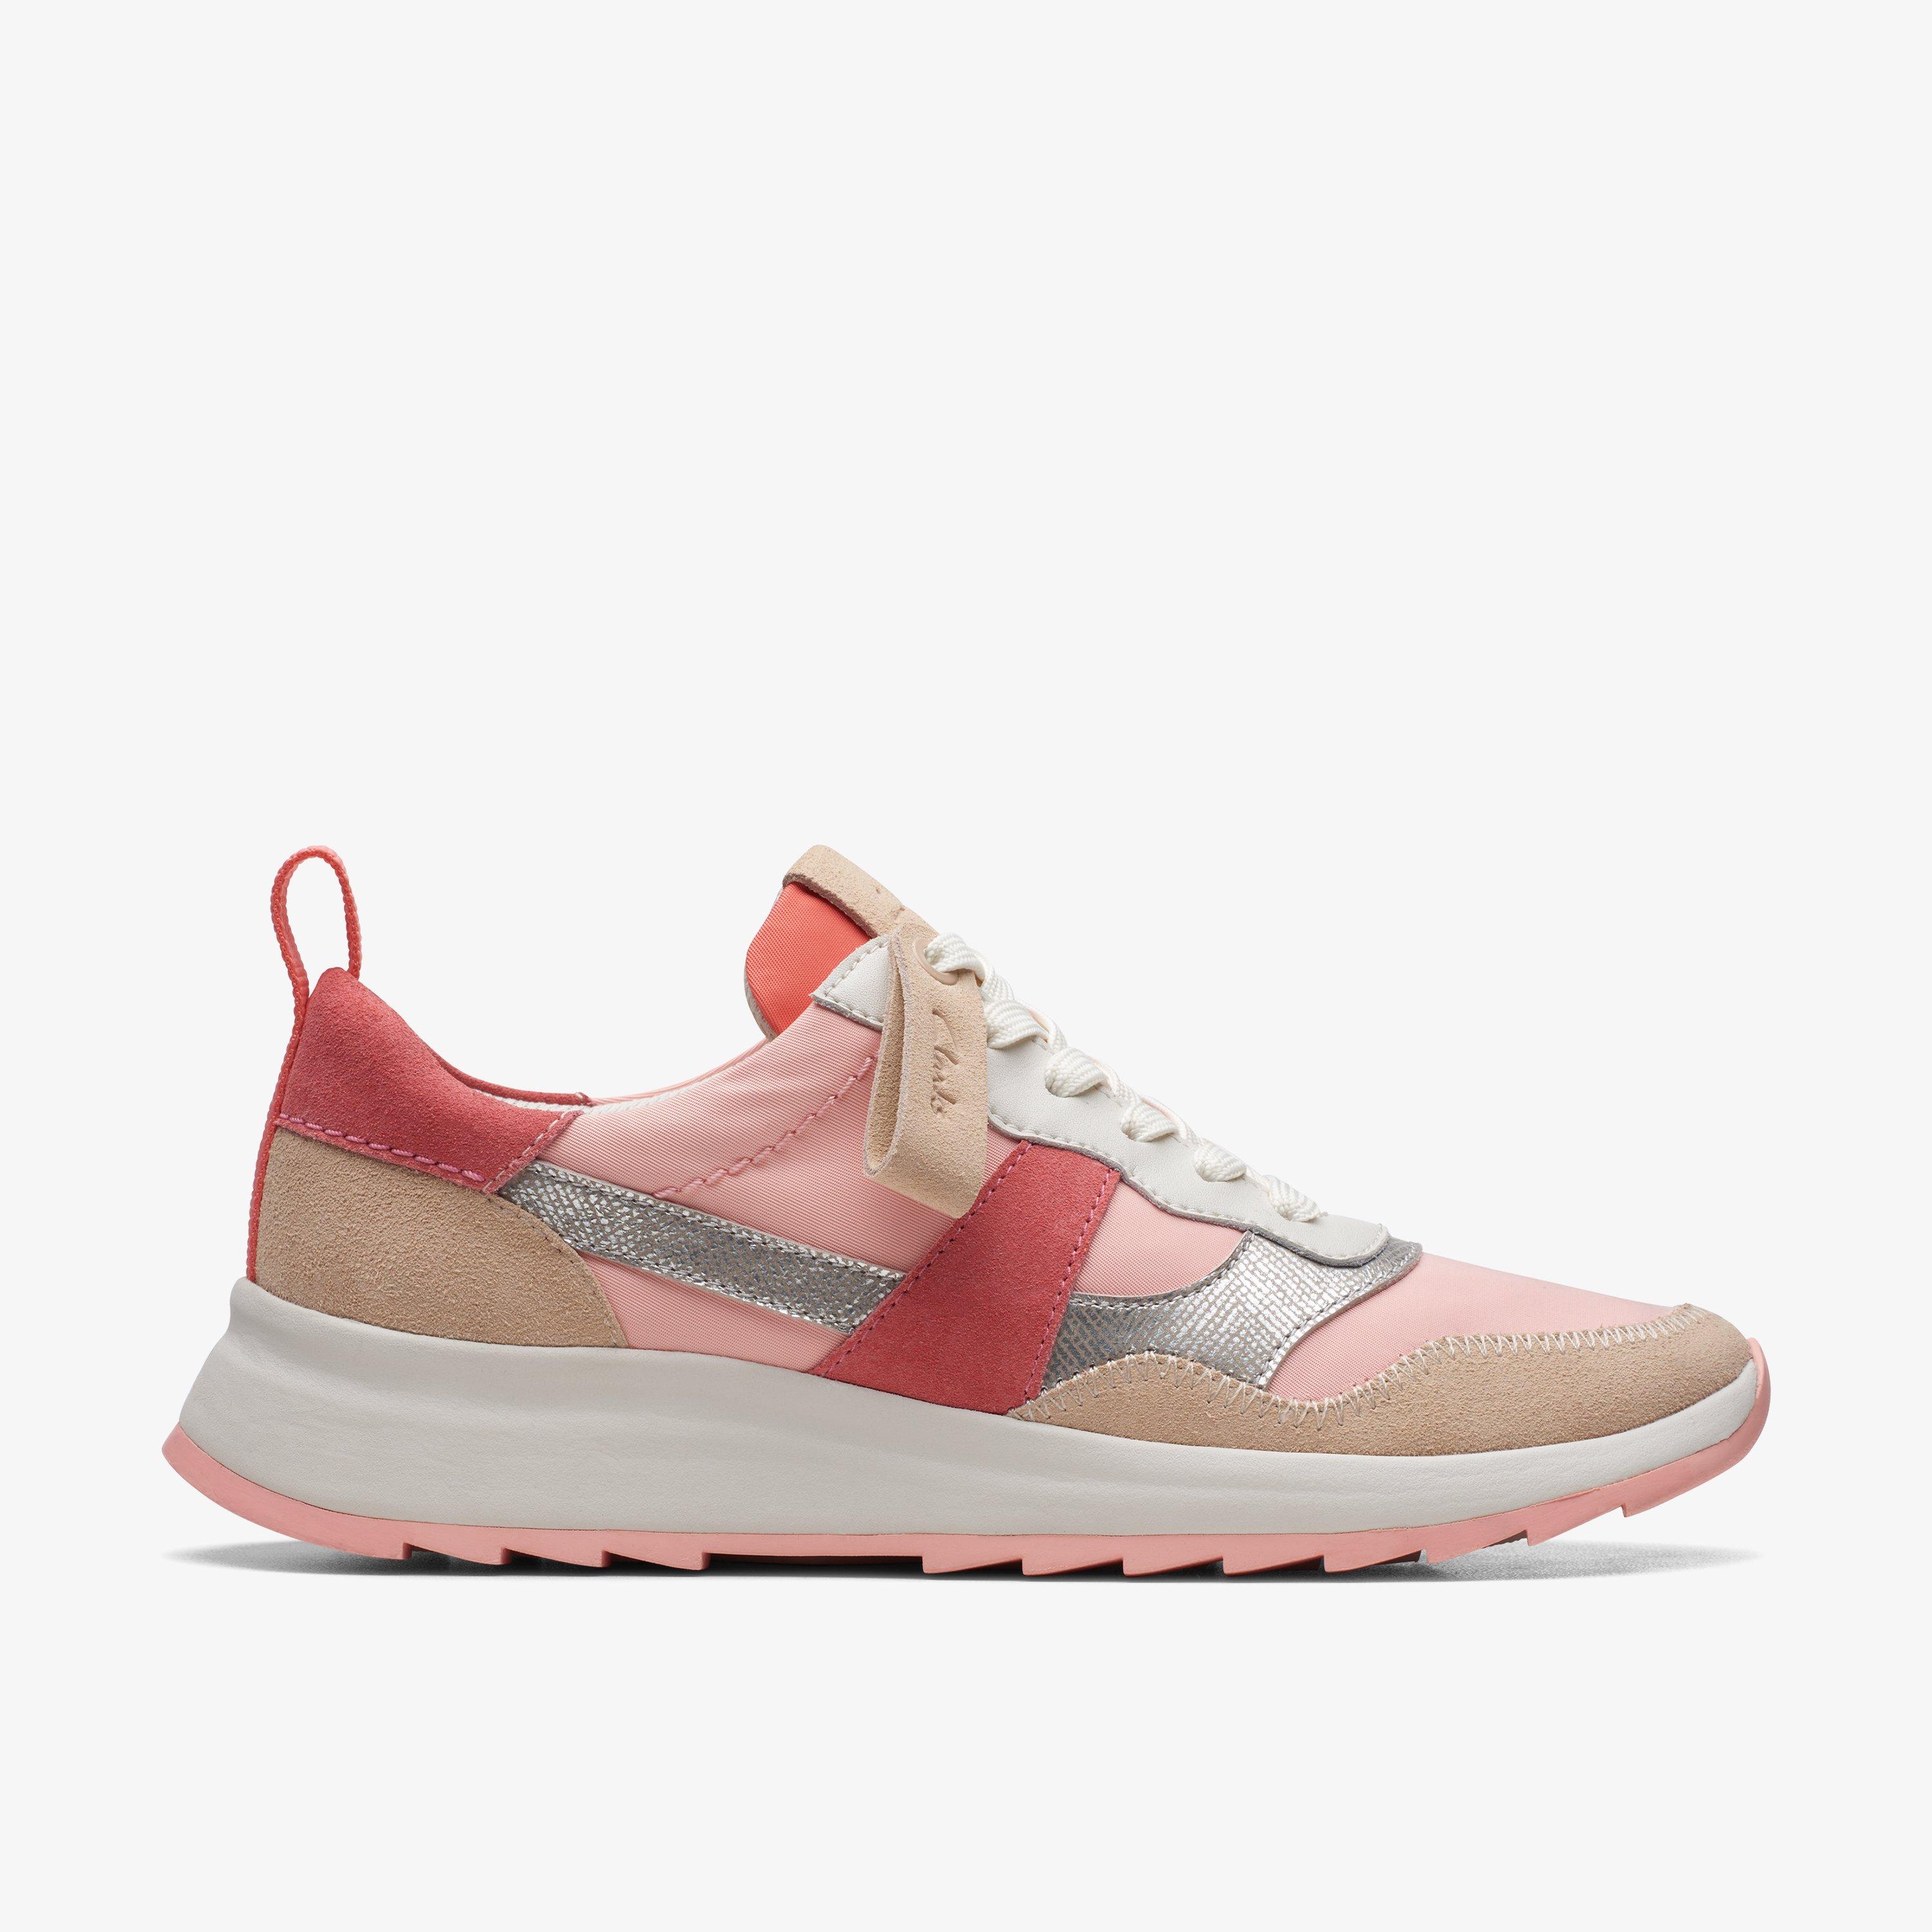 WOMENS Dash Lite Jazz Pale Peach Combination Trainers | Clarks Outlet